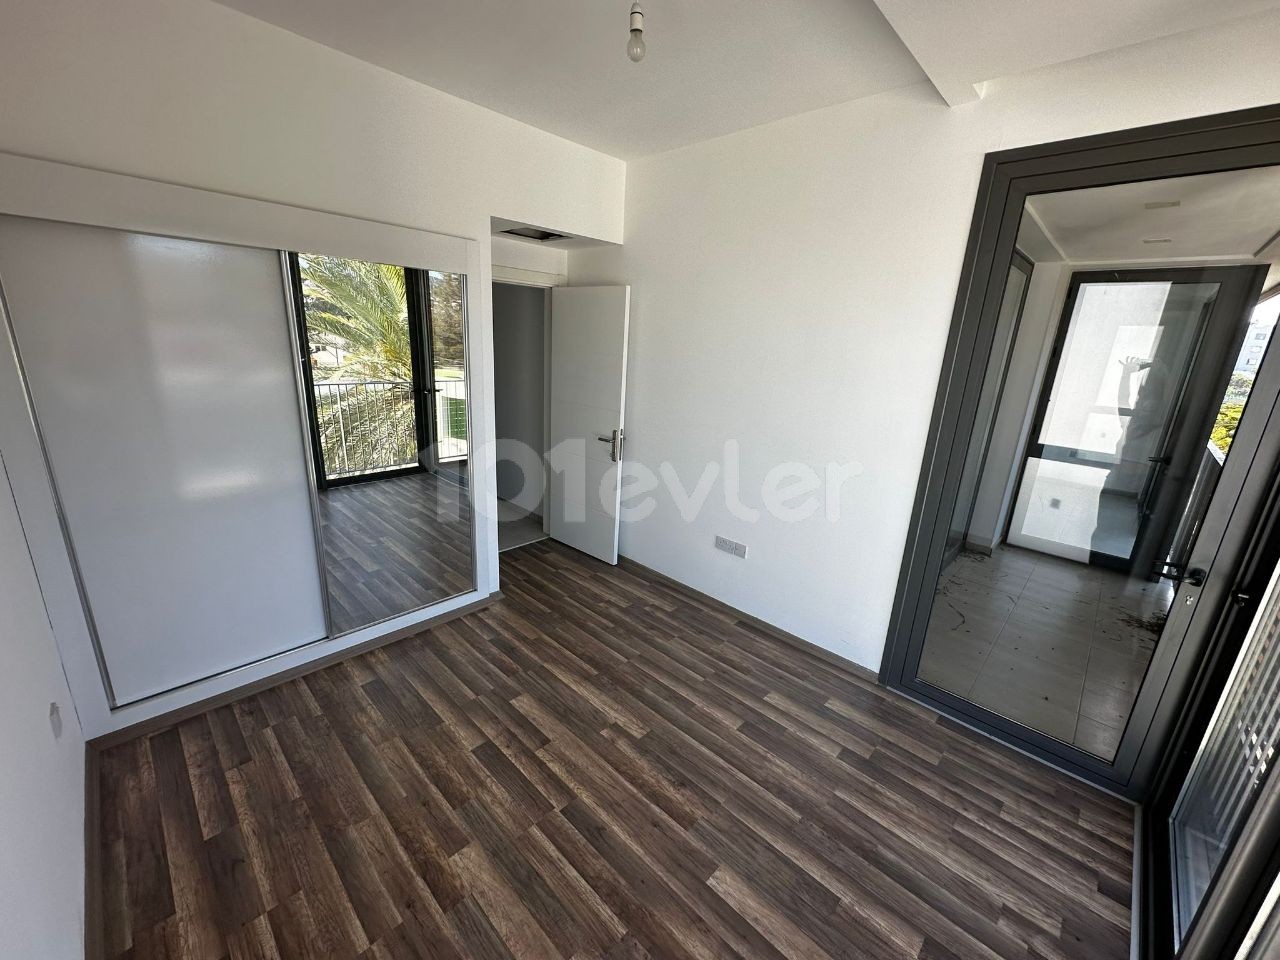 2+1 flats for sale in Nicosia, Hamitköy CityPark site!